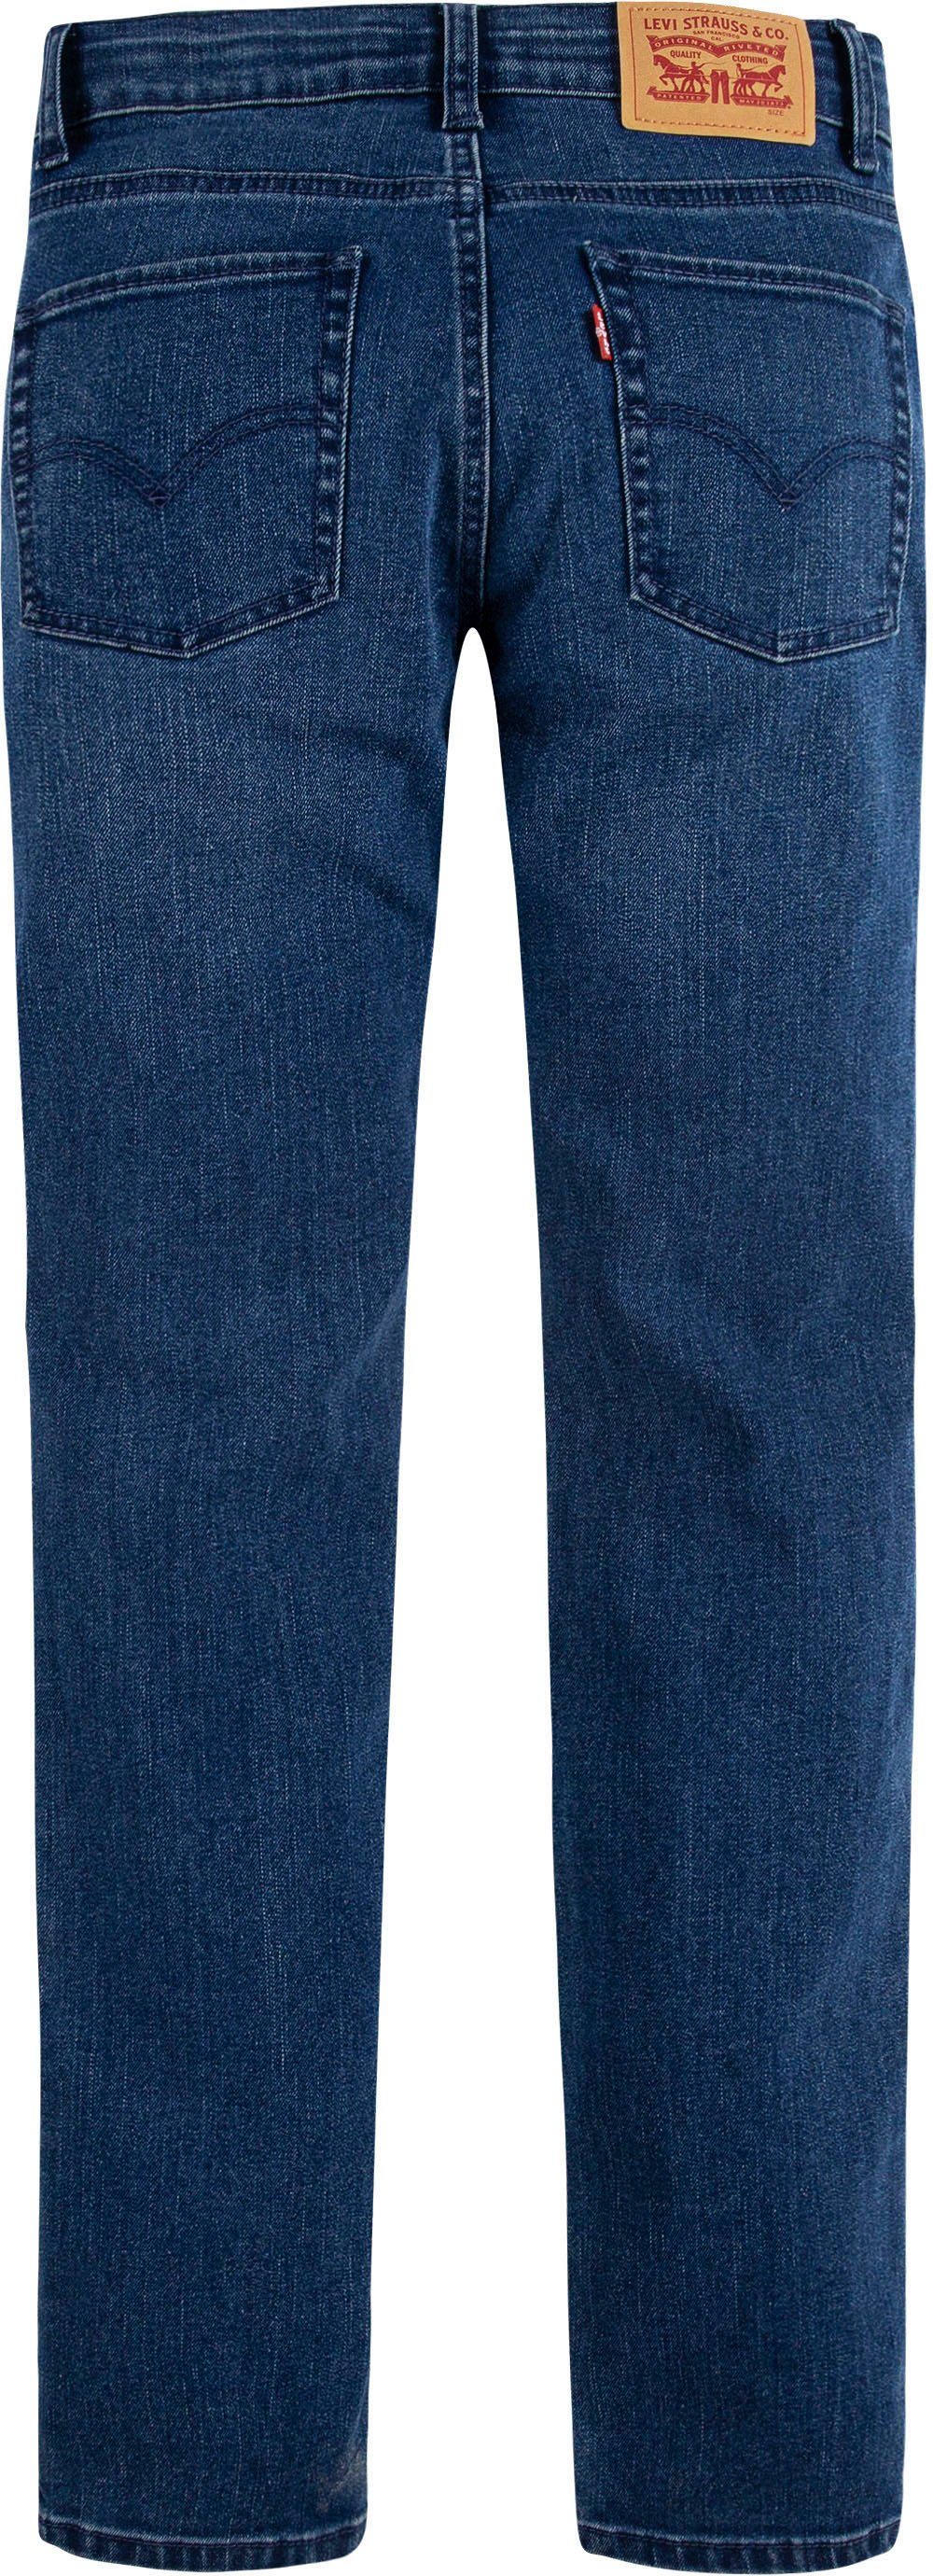 blue Skinny-fit-Jeans BOYS FIT Kids heavy used Levi's® 510 for JEANS SKINNY